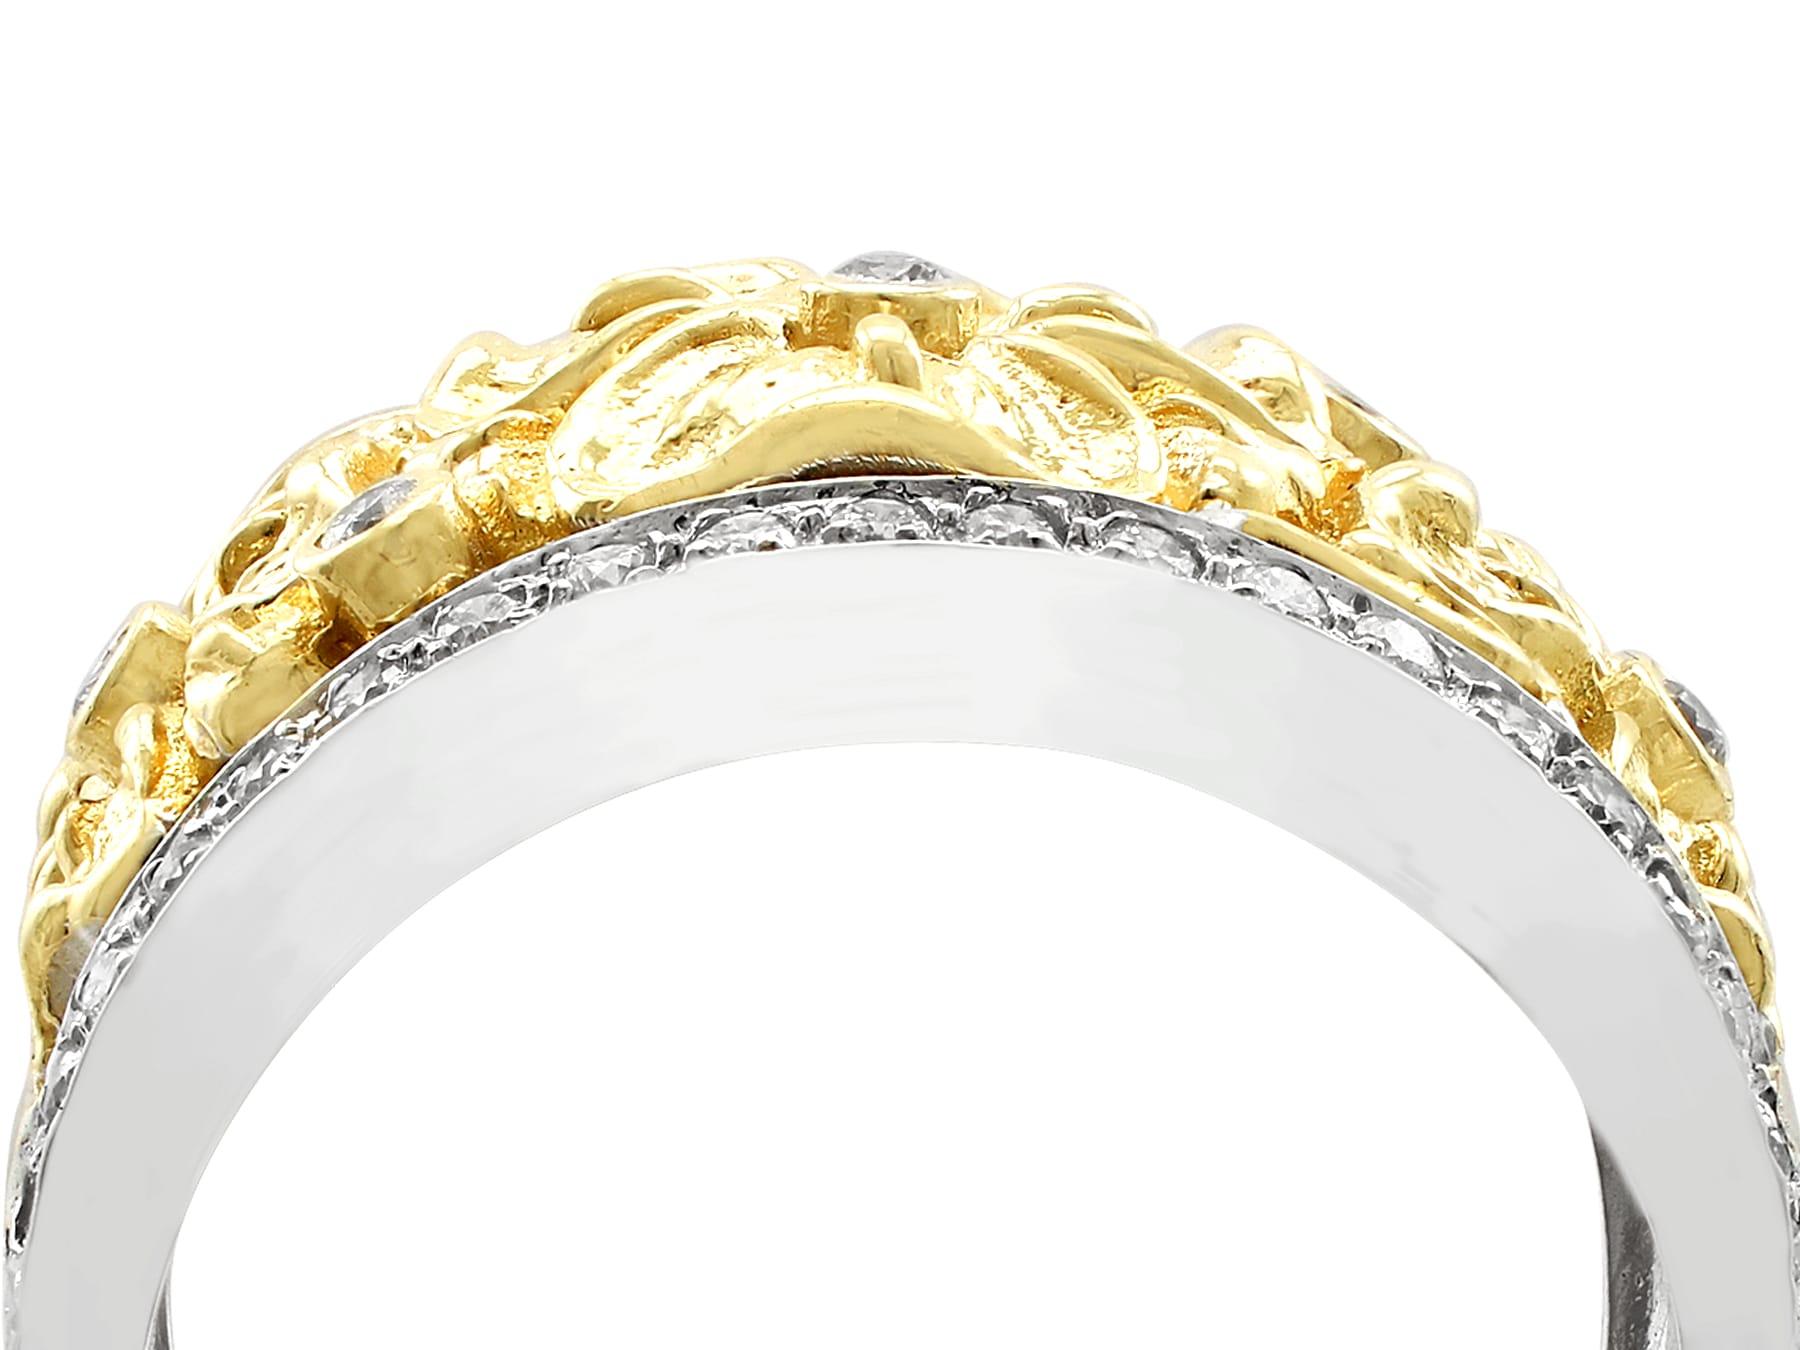 An impressive 0.50 carat diamond and 18 karat yellow and white gold floral dress ring; part of our diverse diamond jewelry and estate jewelry collections.

This fine and impressive vintage gold ring has been crafted in 18k yellow and white